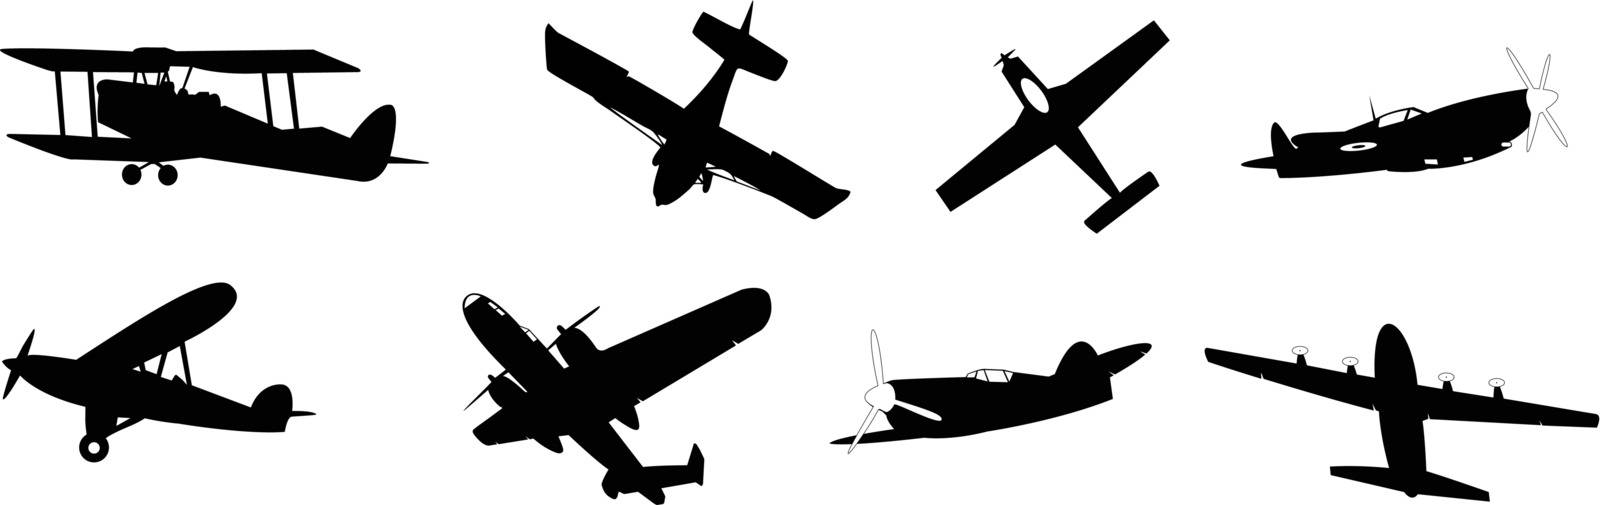 set of propeller aircraft silhouettes isolated on white